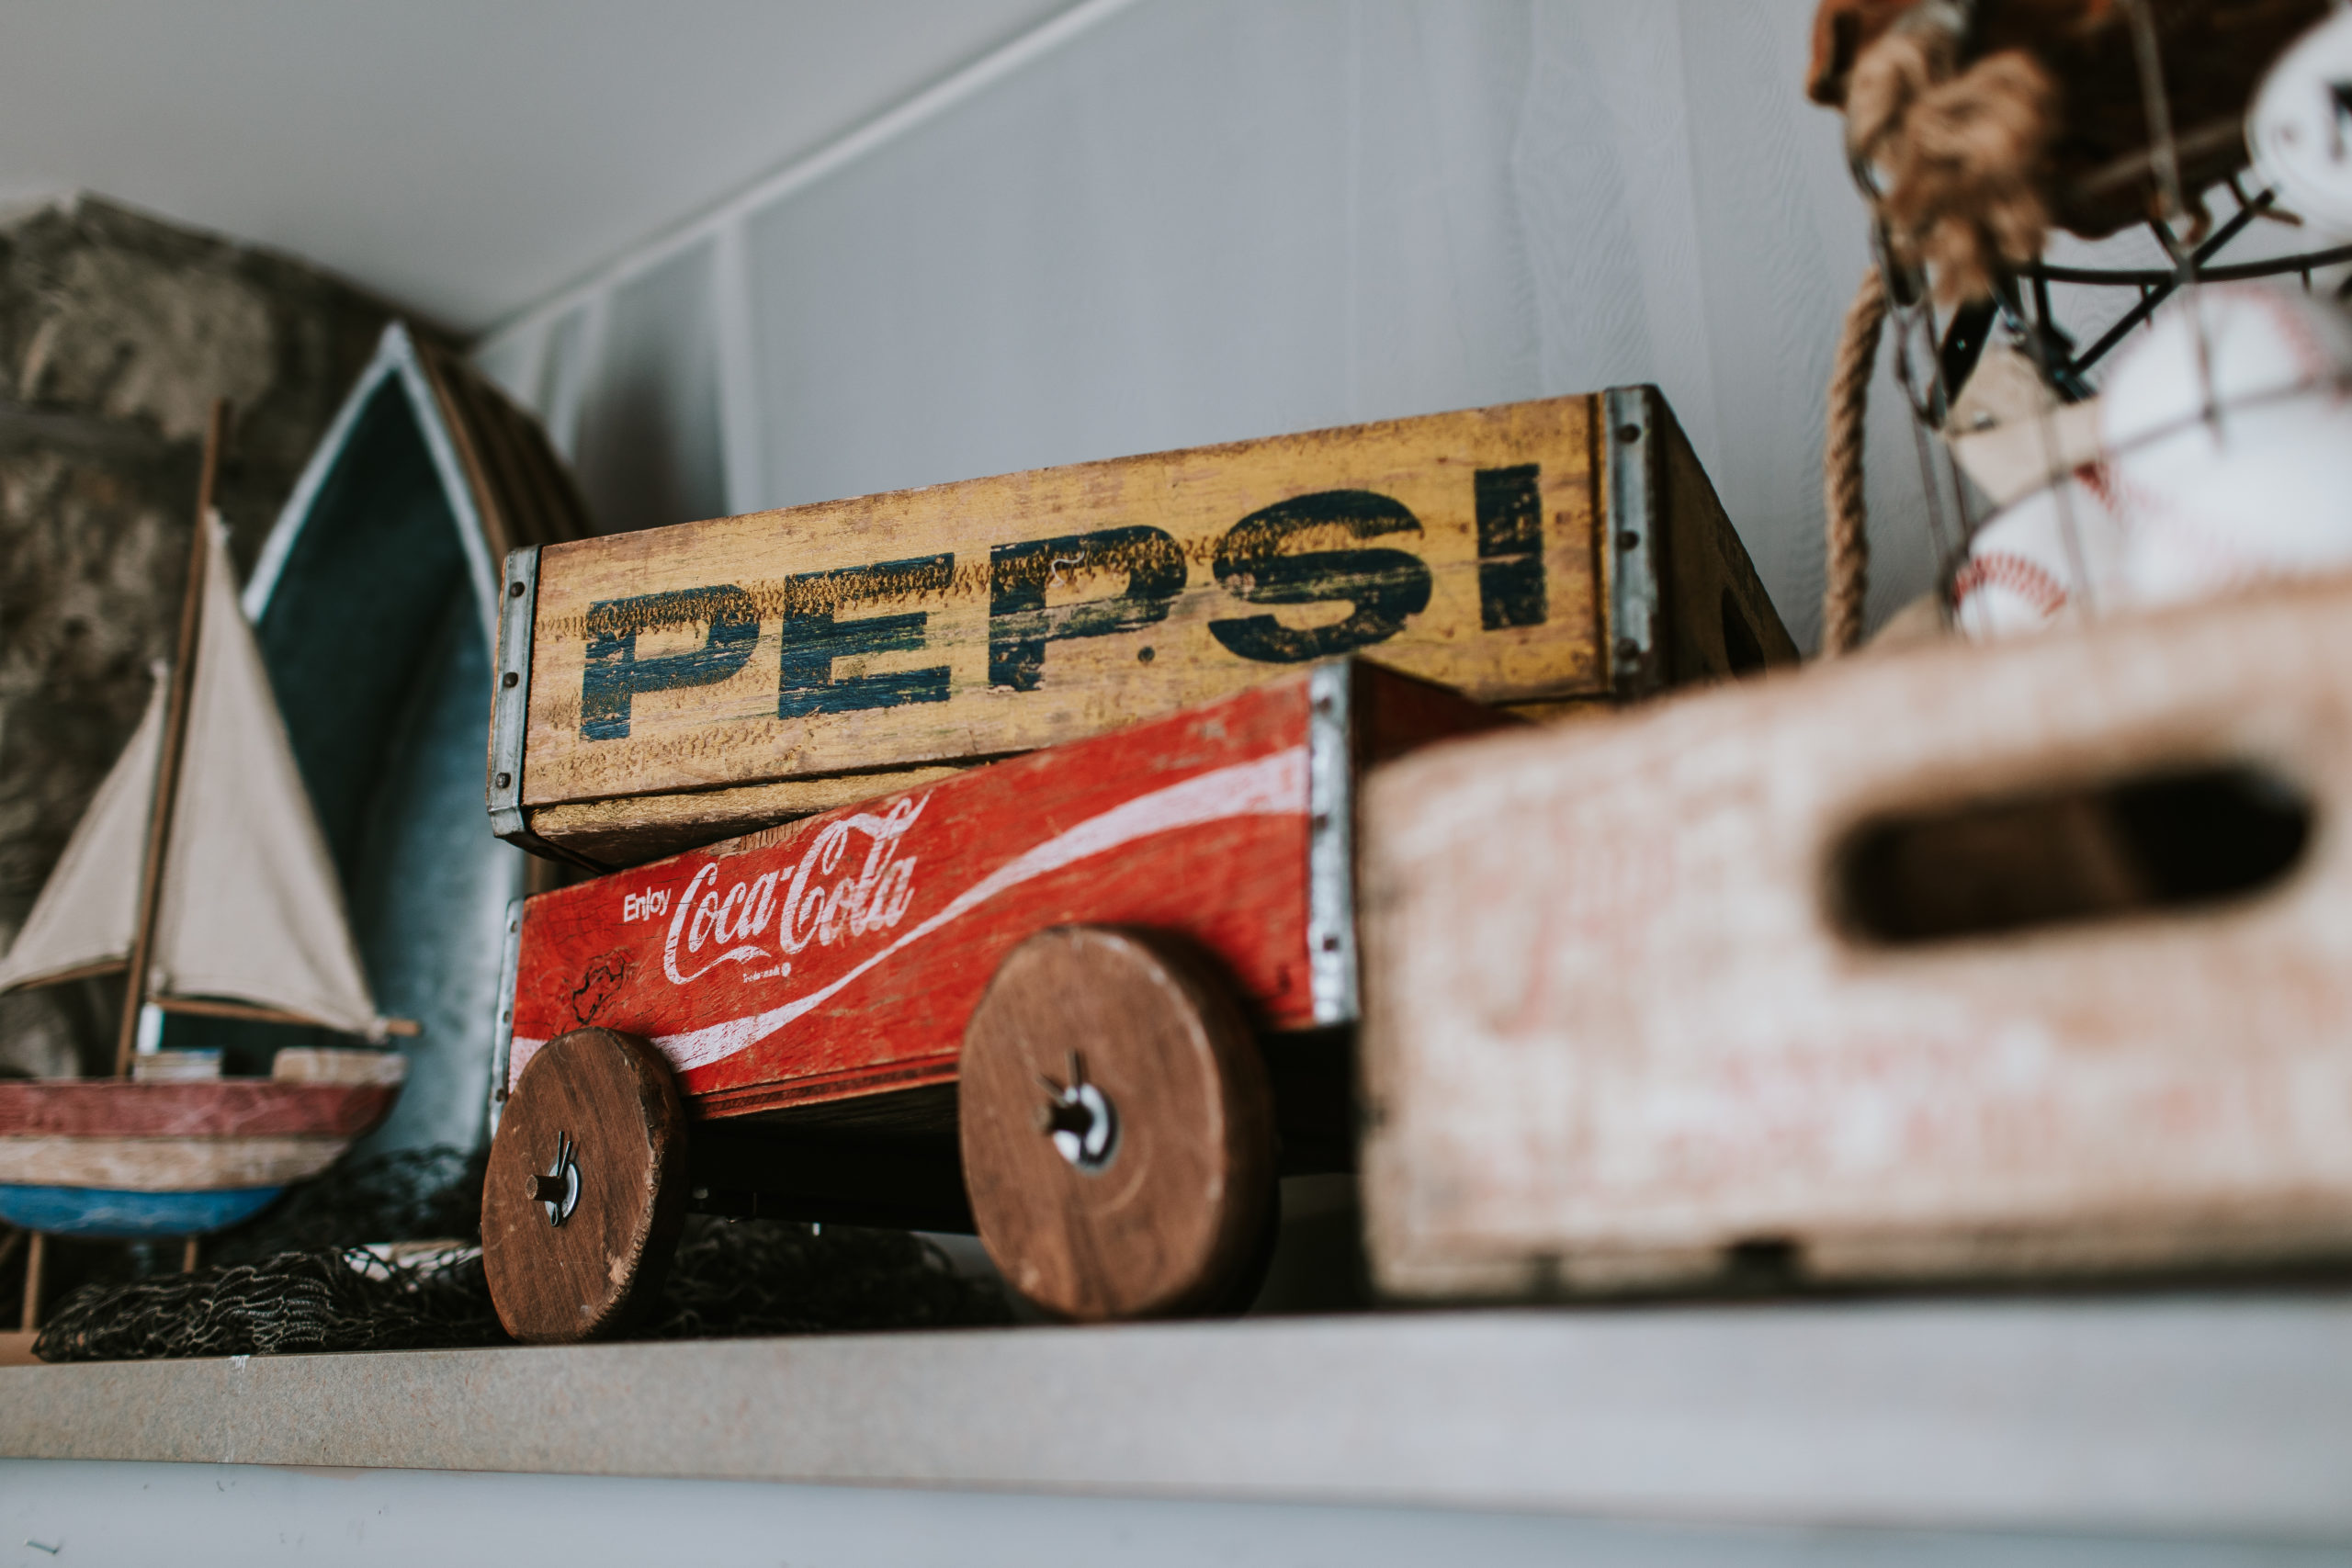 Baseball items and Pepsi and Coke crates used in photography. Photogenics on Location 63090